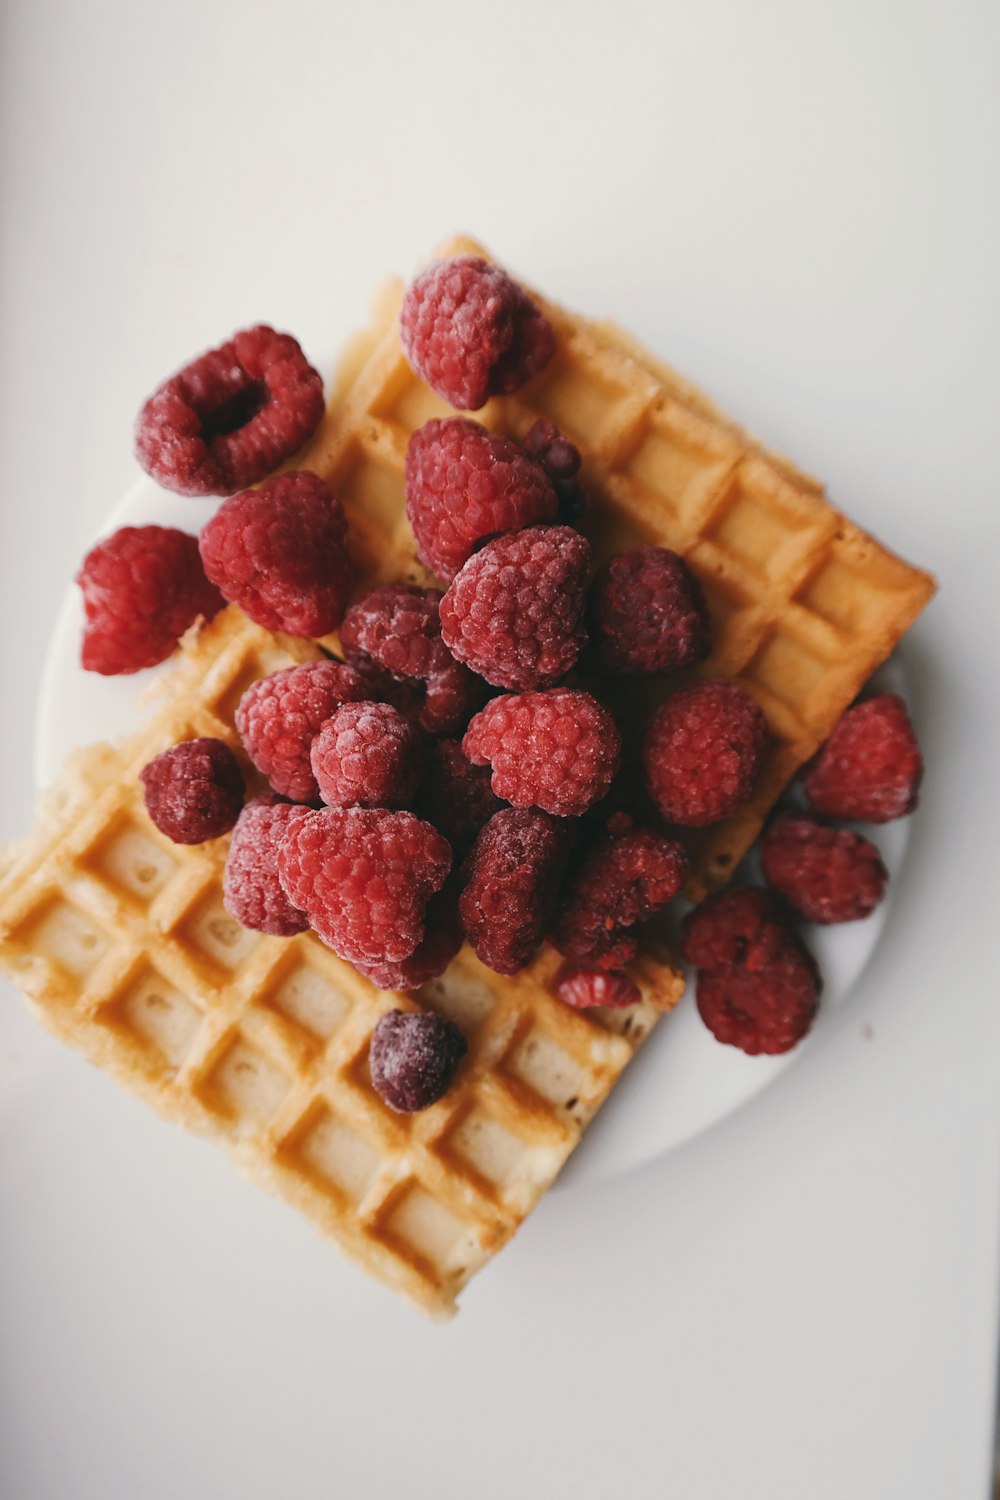 Raspberries on top of a rectangle shaped waffle.